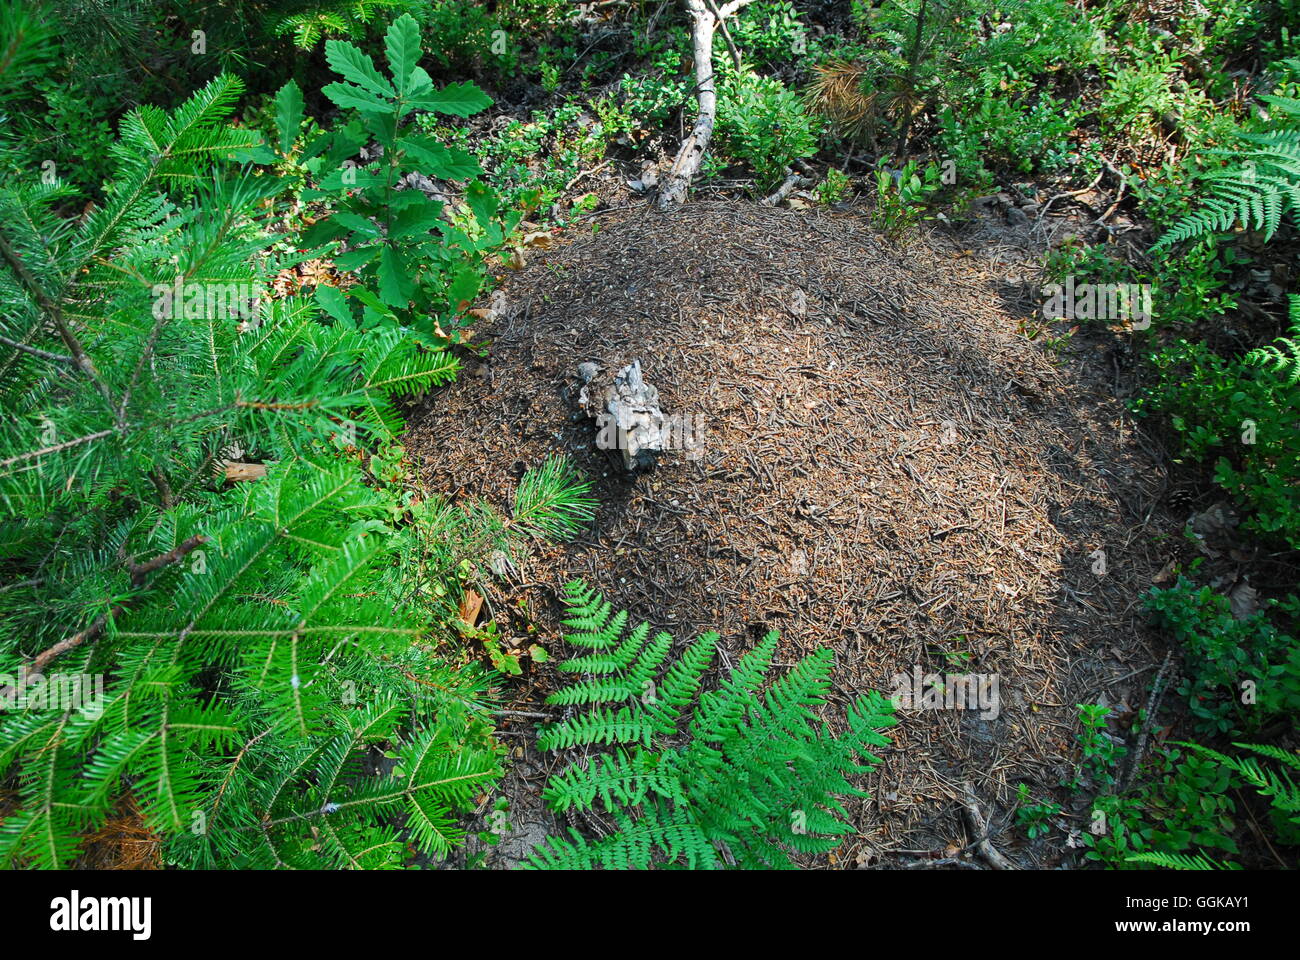 Anthill, ecosystems, ants, forest,leaves, ferns Stock Photo